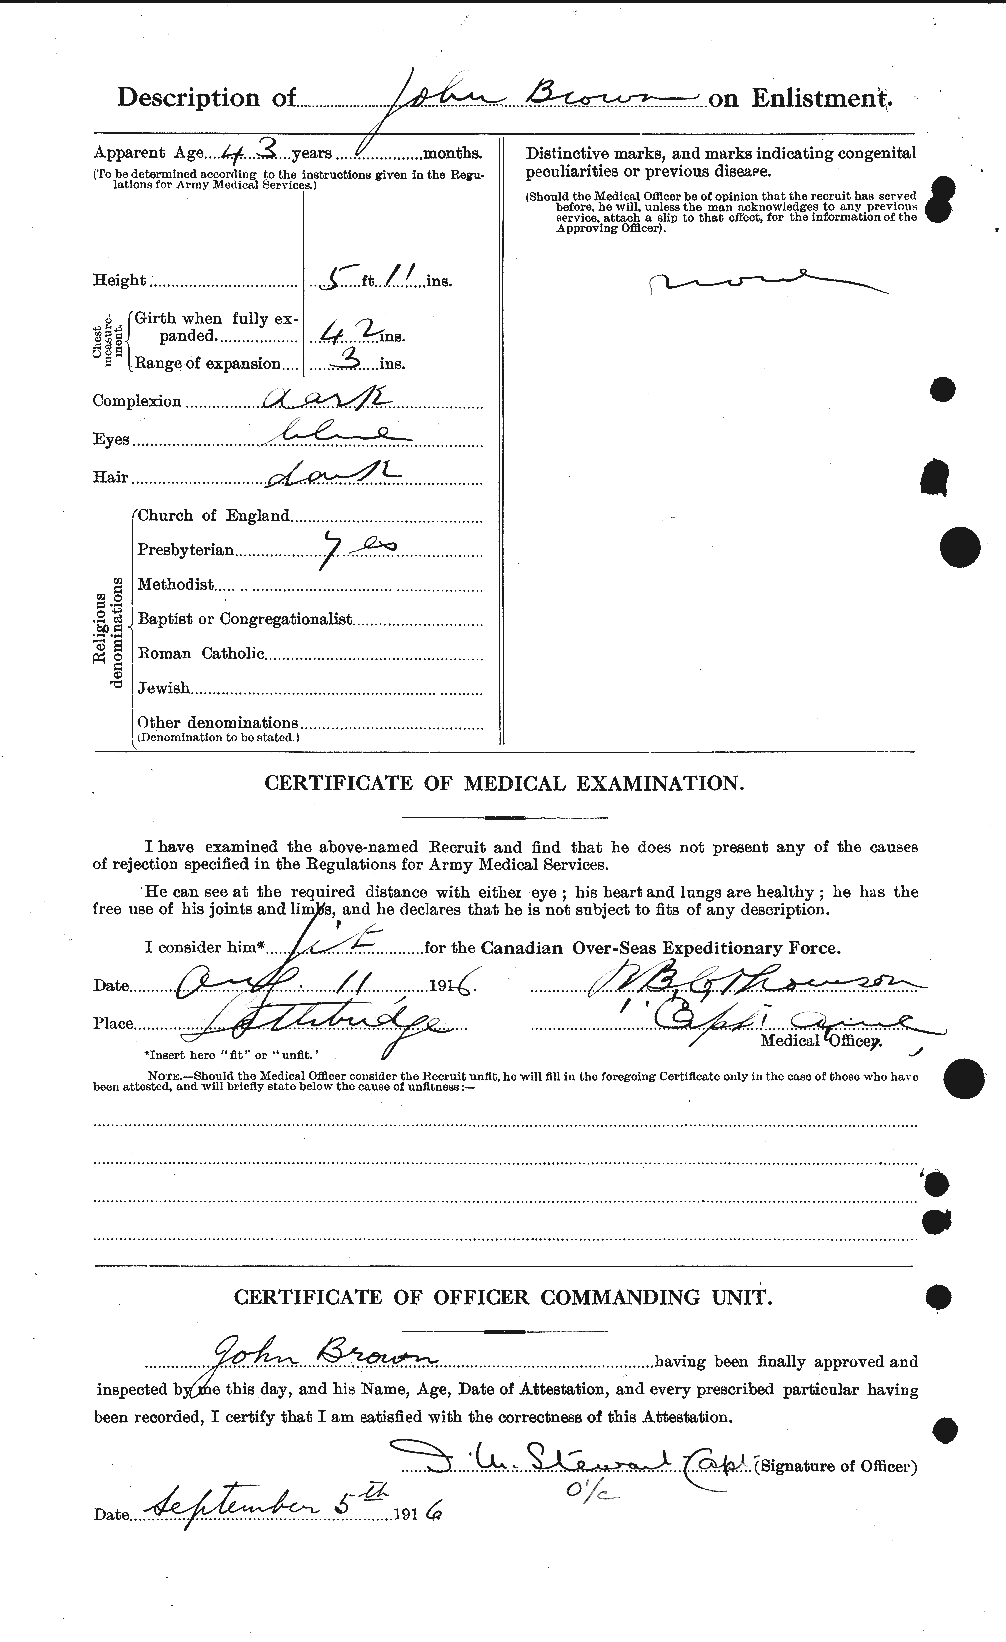 Personnel Records of the First World War - CEF 264551b